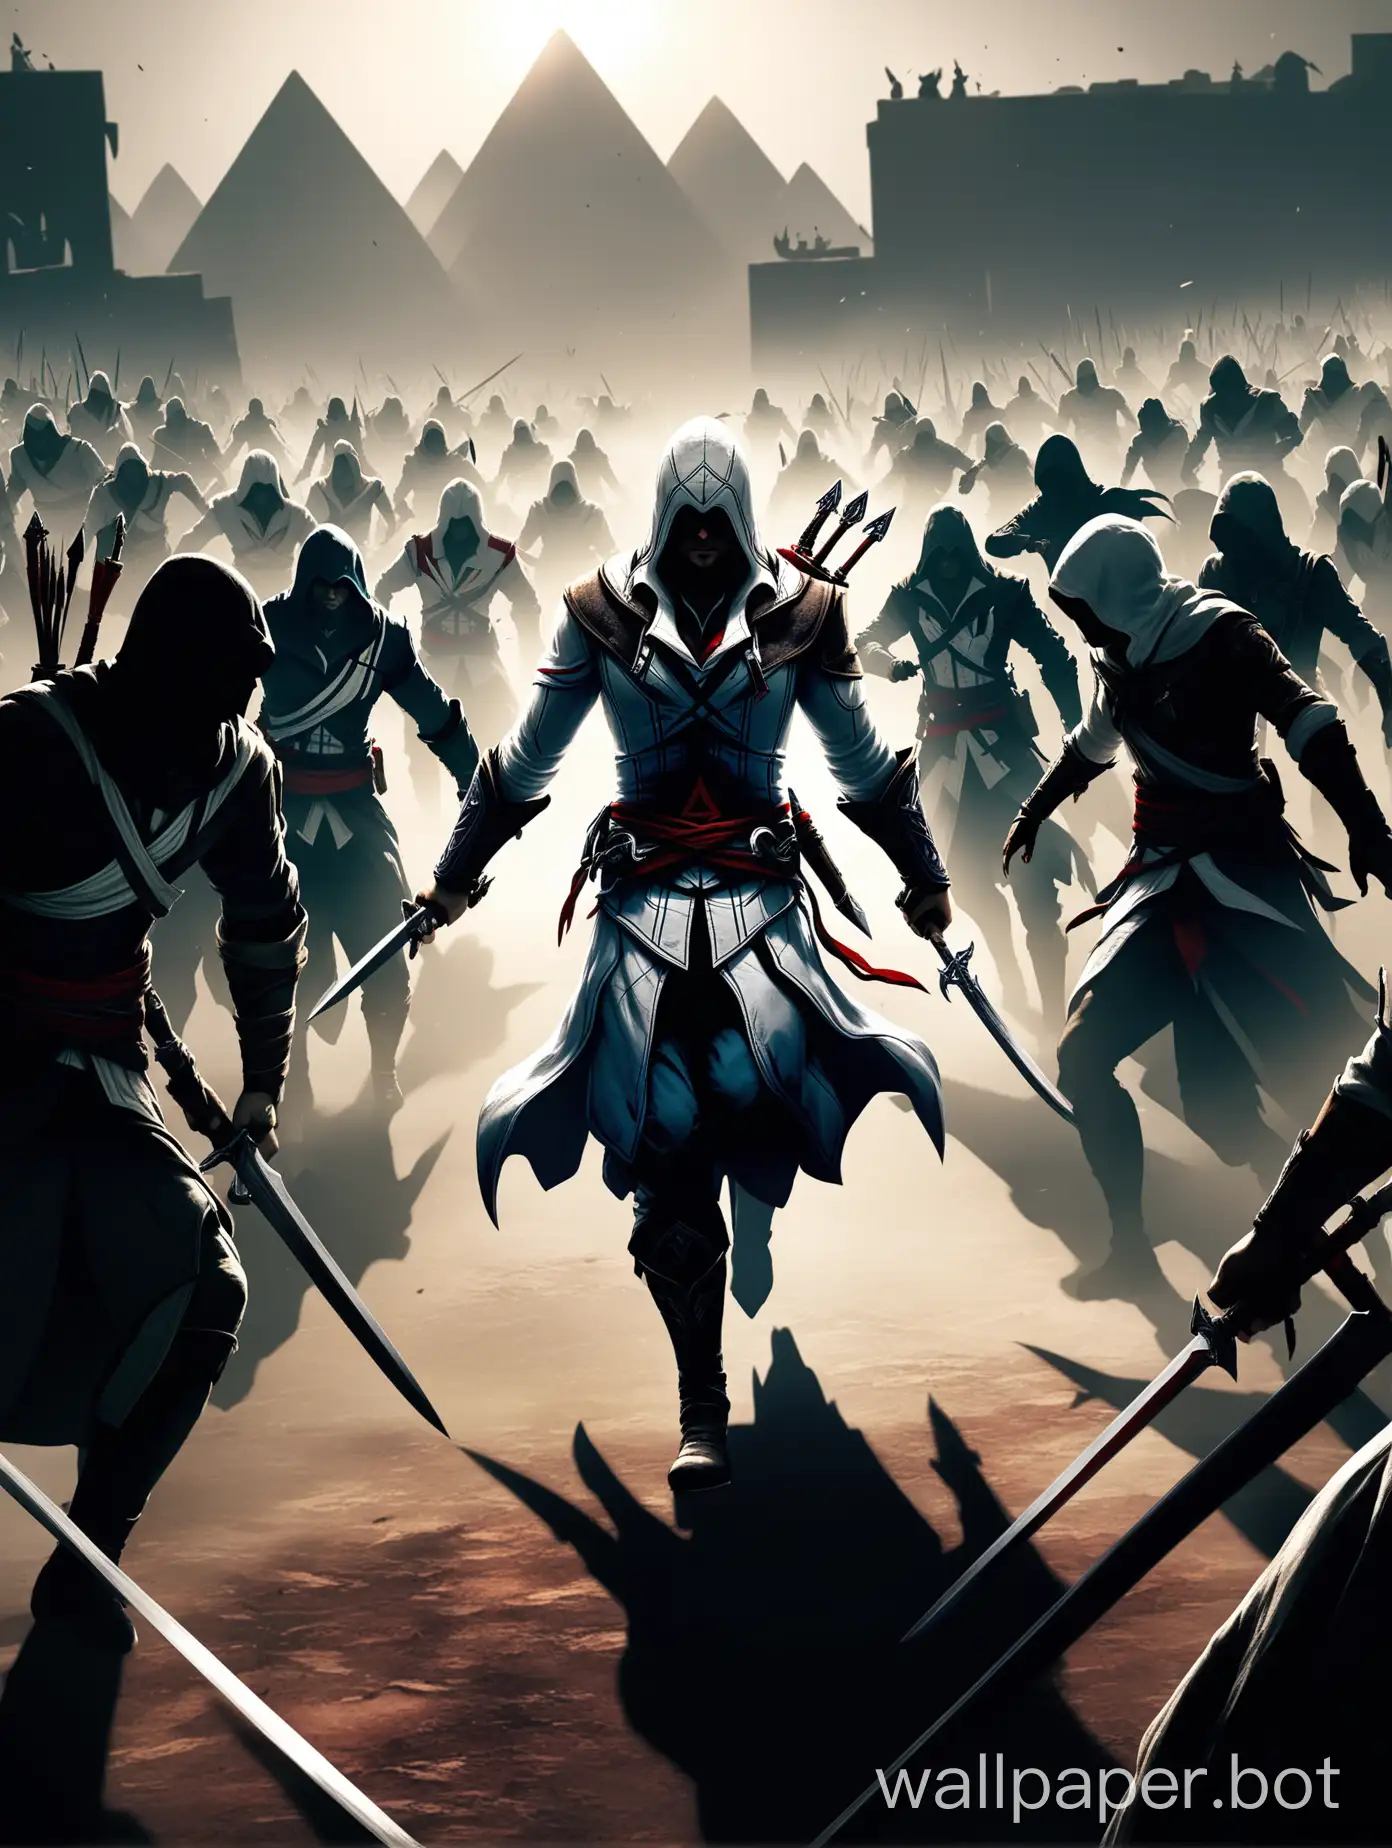 Shadow-of-Assassin-Creed-Engaged-in-Fierce-Battle